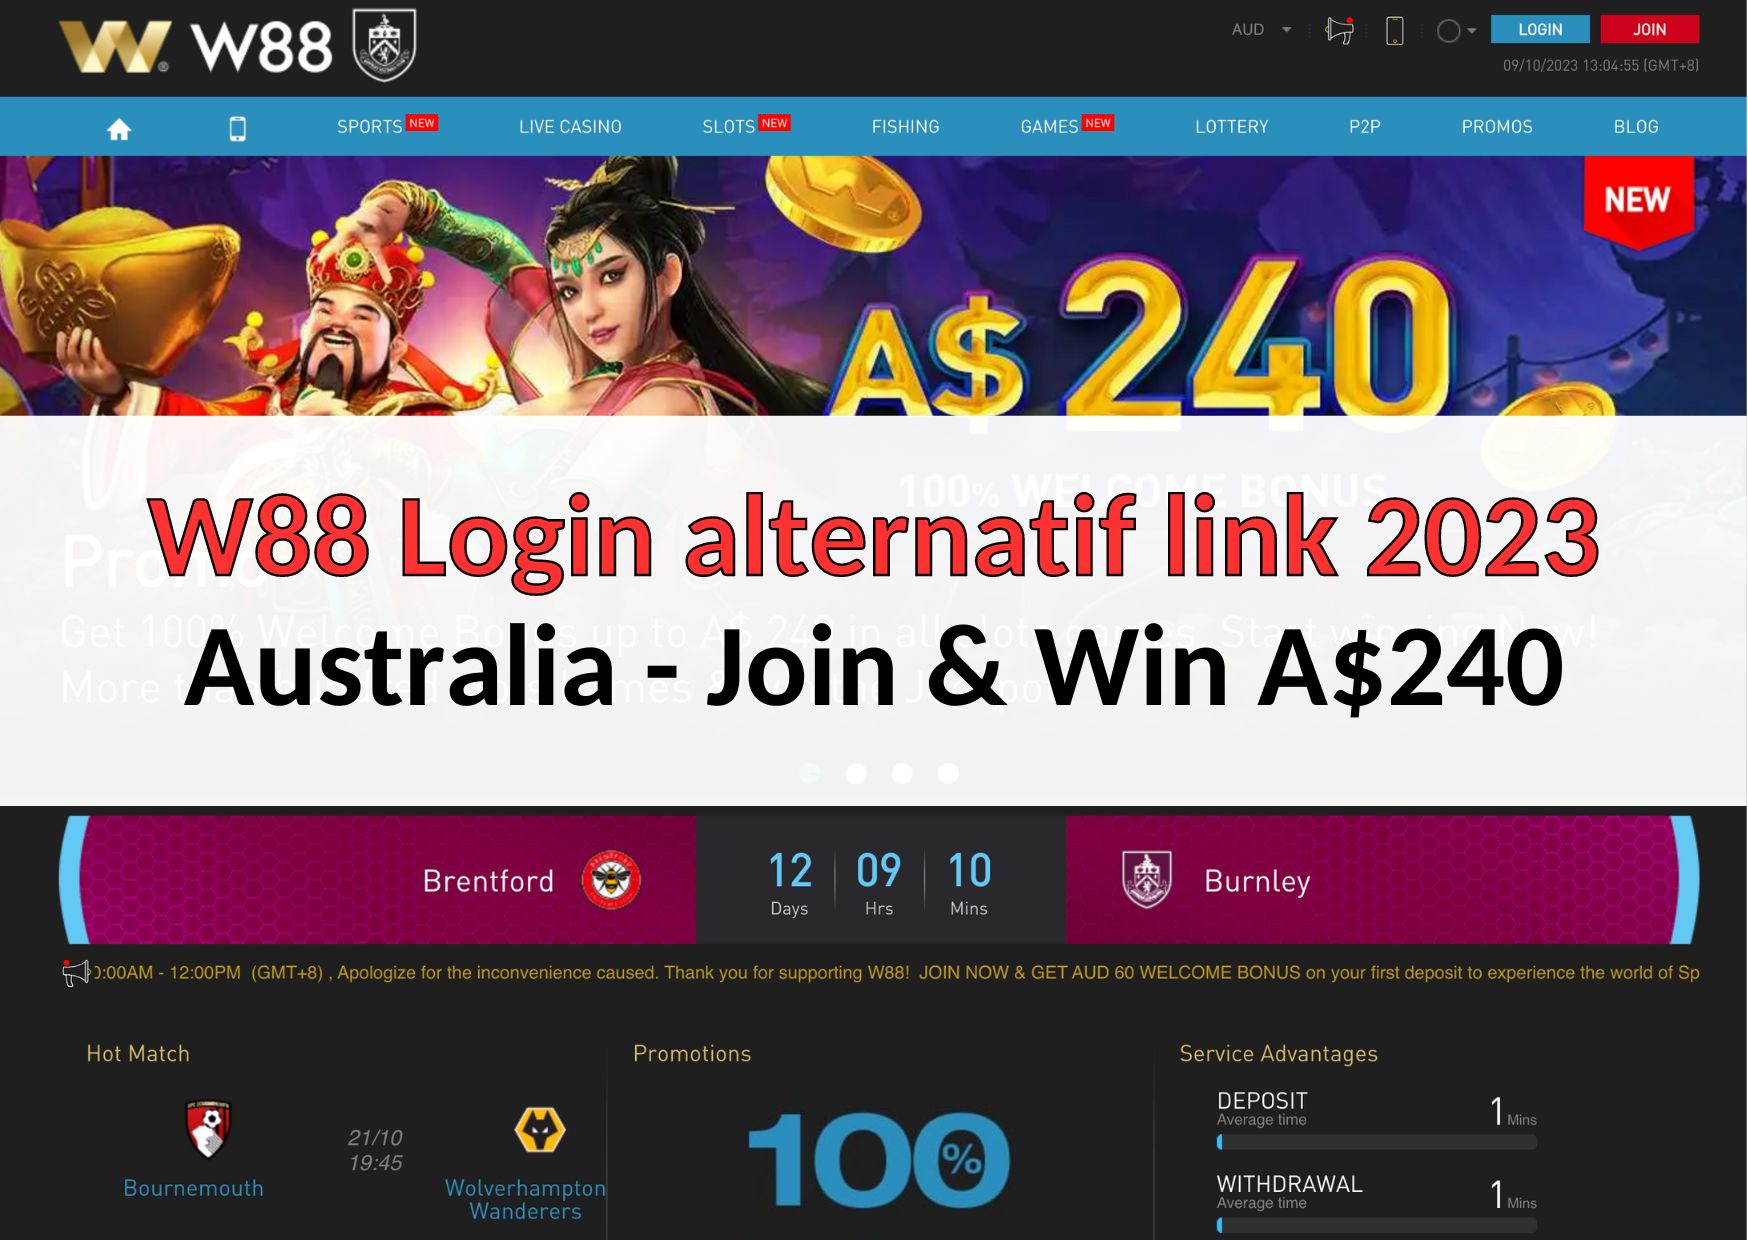 w88 casino, W88 offers an innovative and betting opportunit…